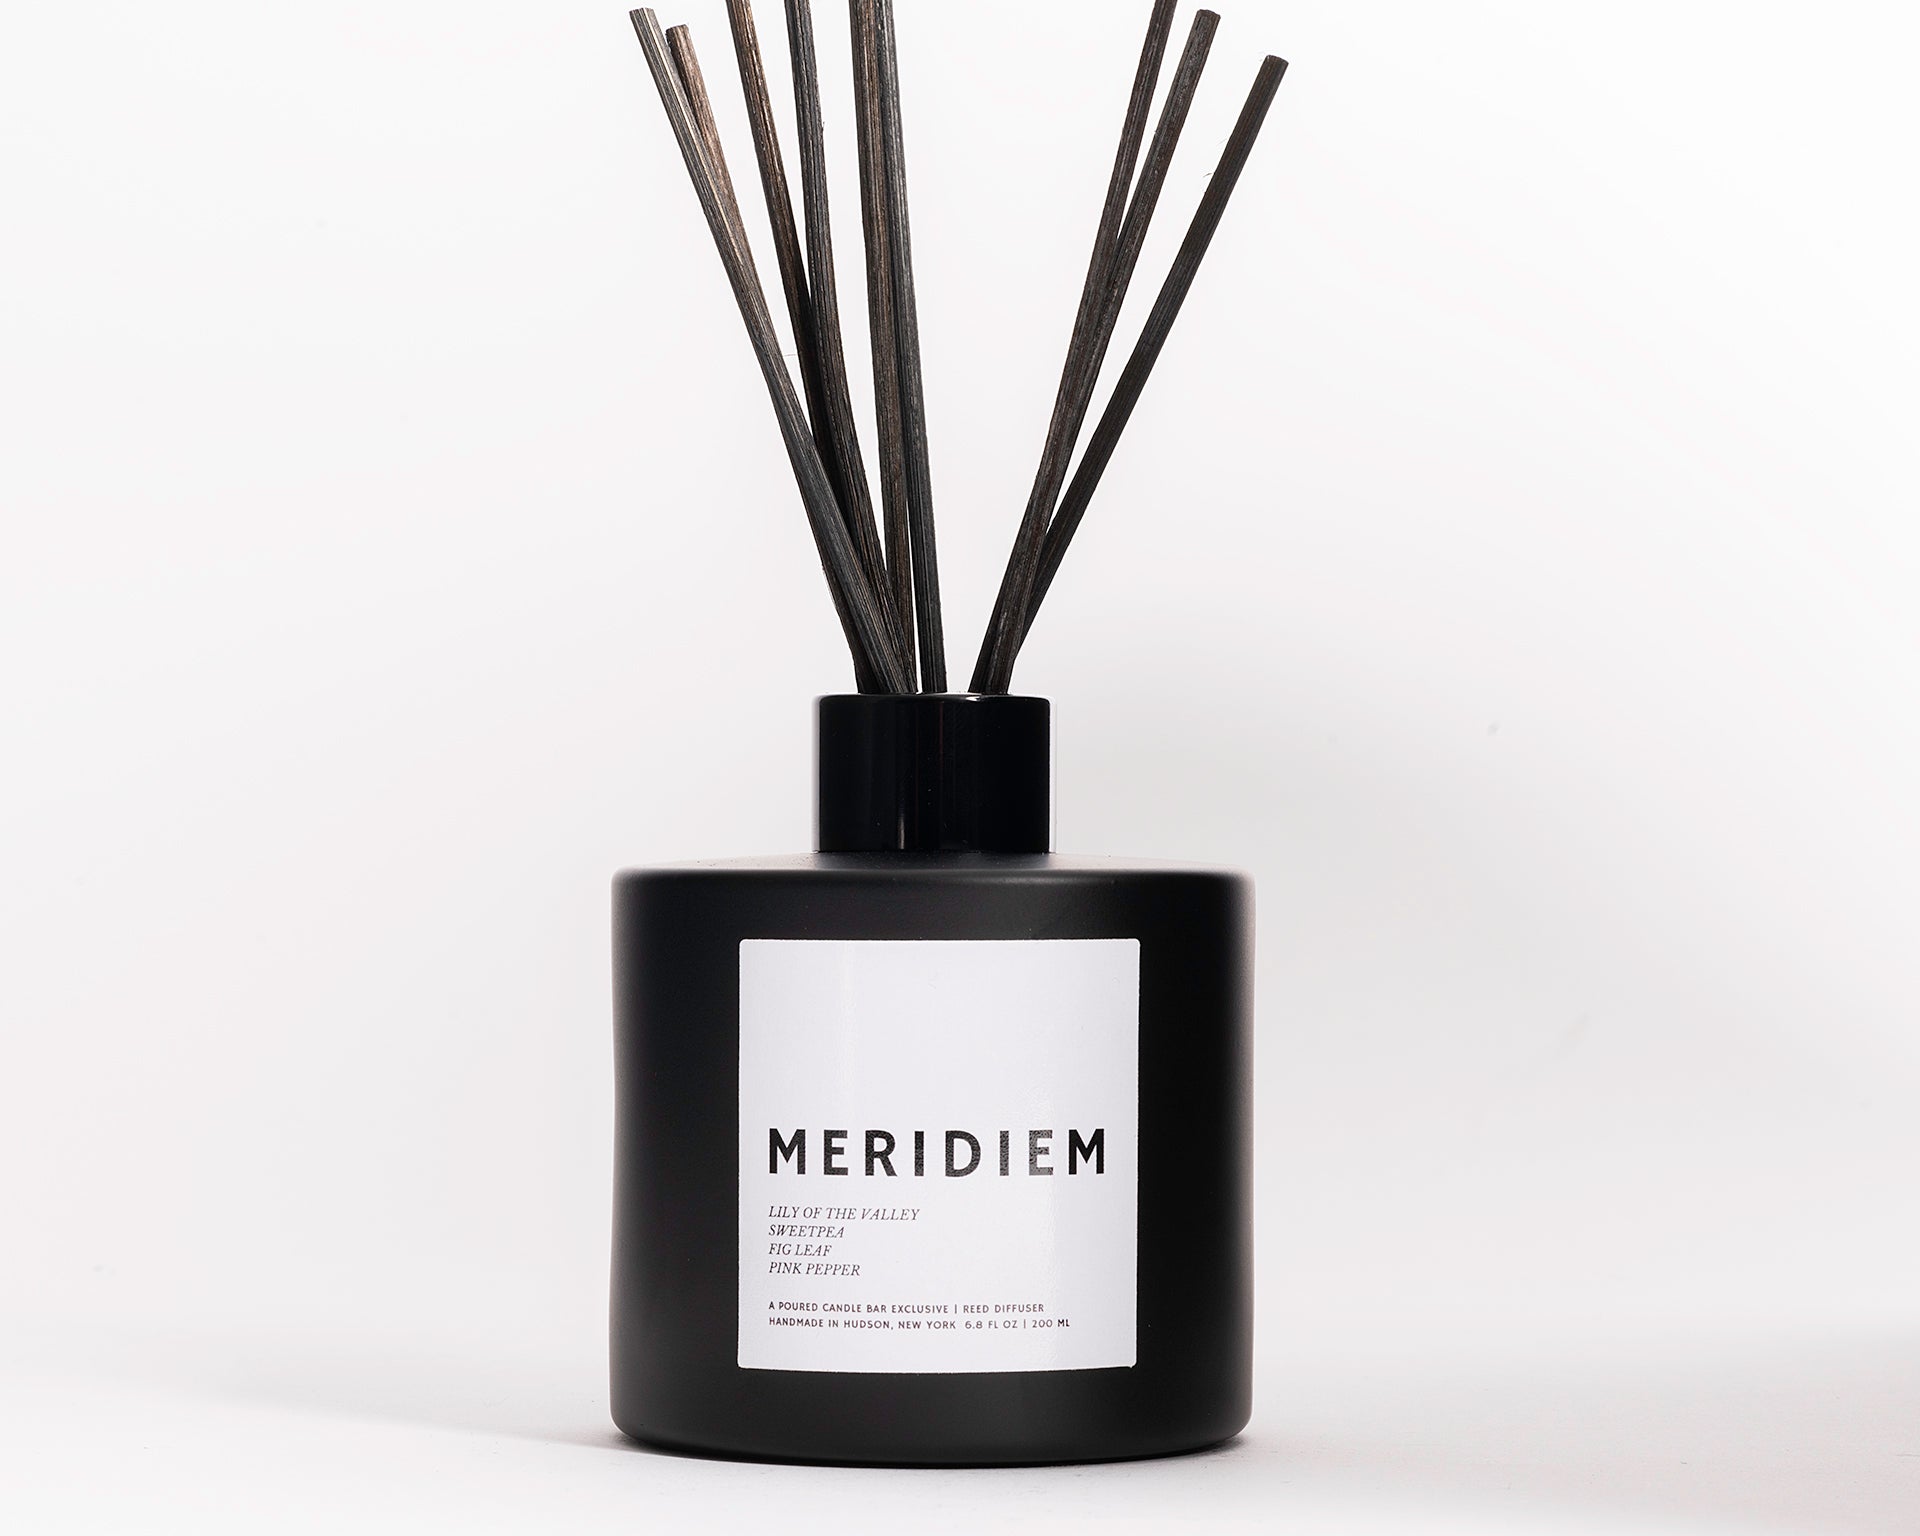 200 ml reed diffusers in a black circular glass vessel.  Profile Description: Green grass with sweet fruit + soft spice  Notes: Aldehydes, Lilly of the Valley, Grass, Sweet Pea, Fig Leaf, Pink Peppercorn